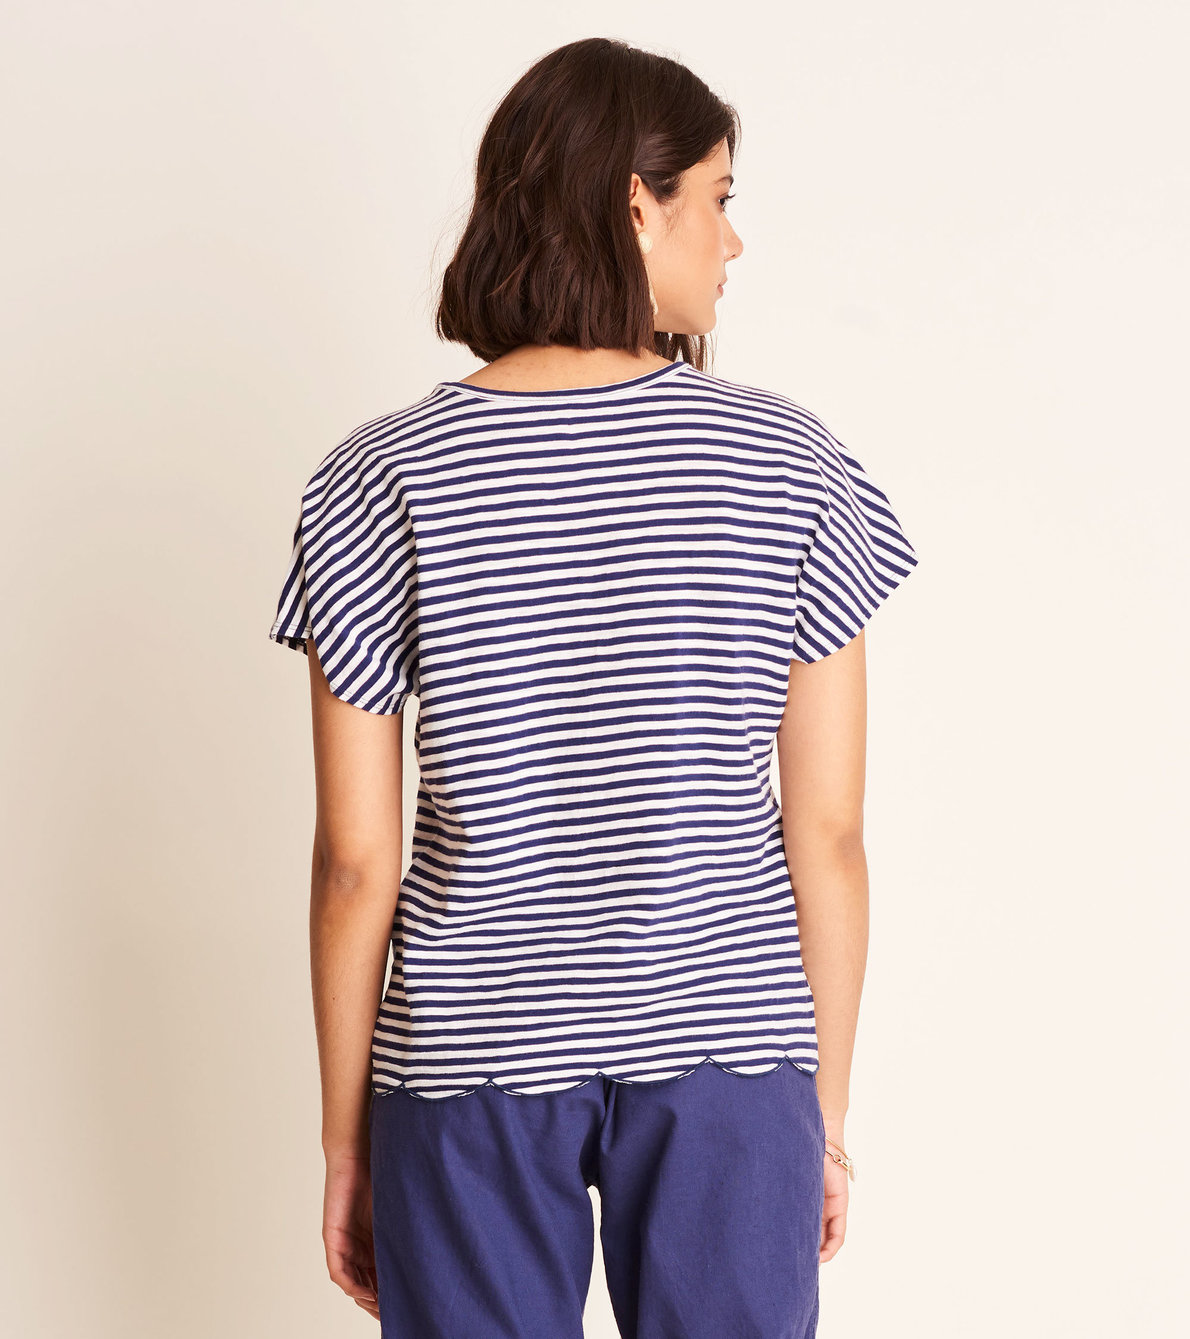 View larger image of Embroidered Tee - Blue Stripes